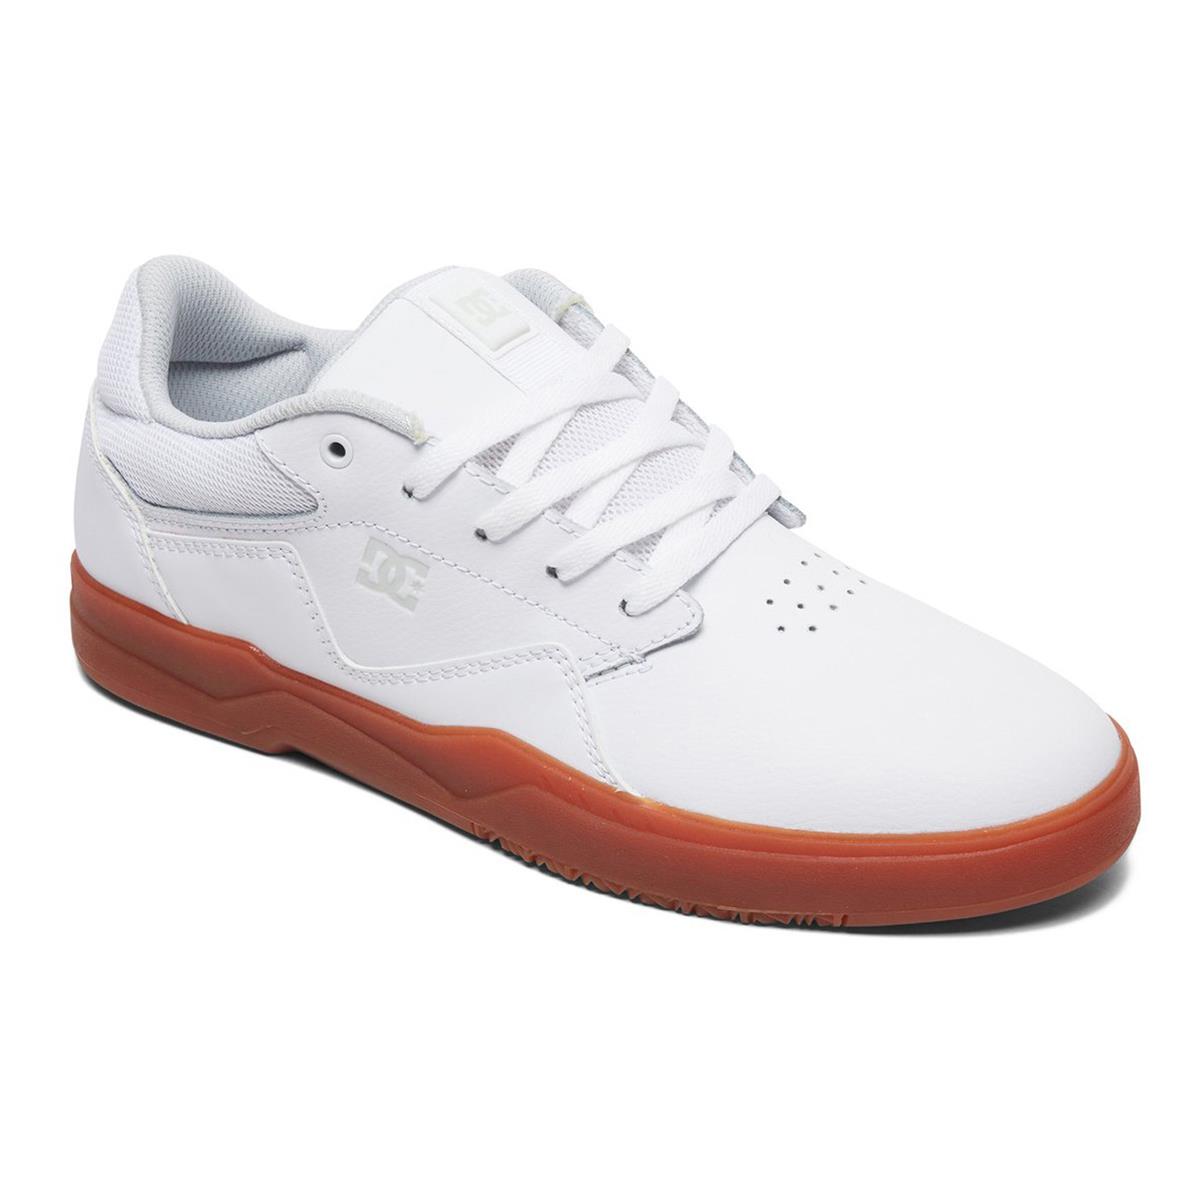 DC Chaussures Barksdale White/GUM